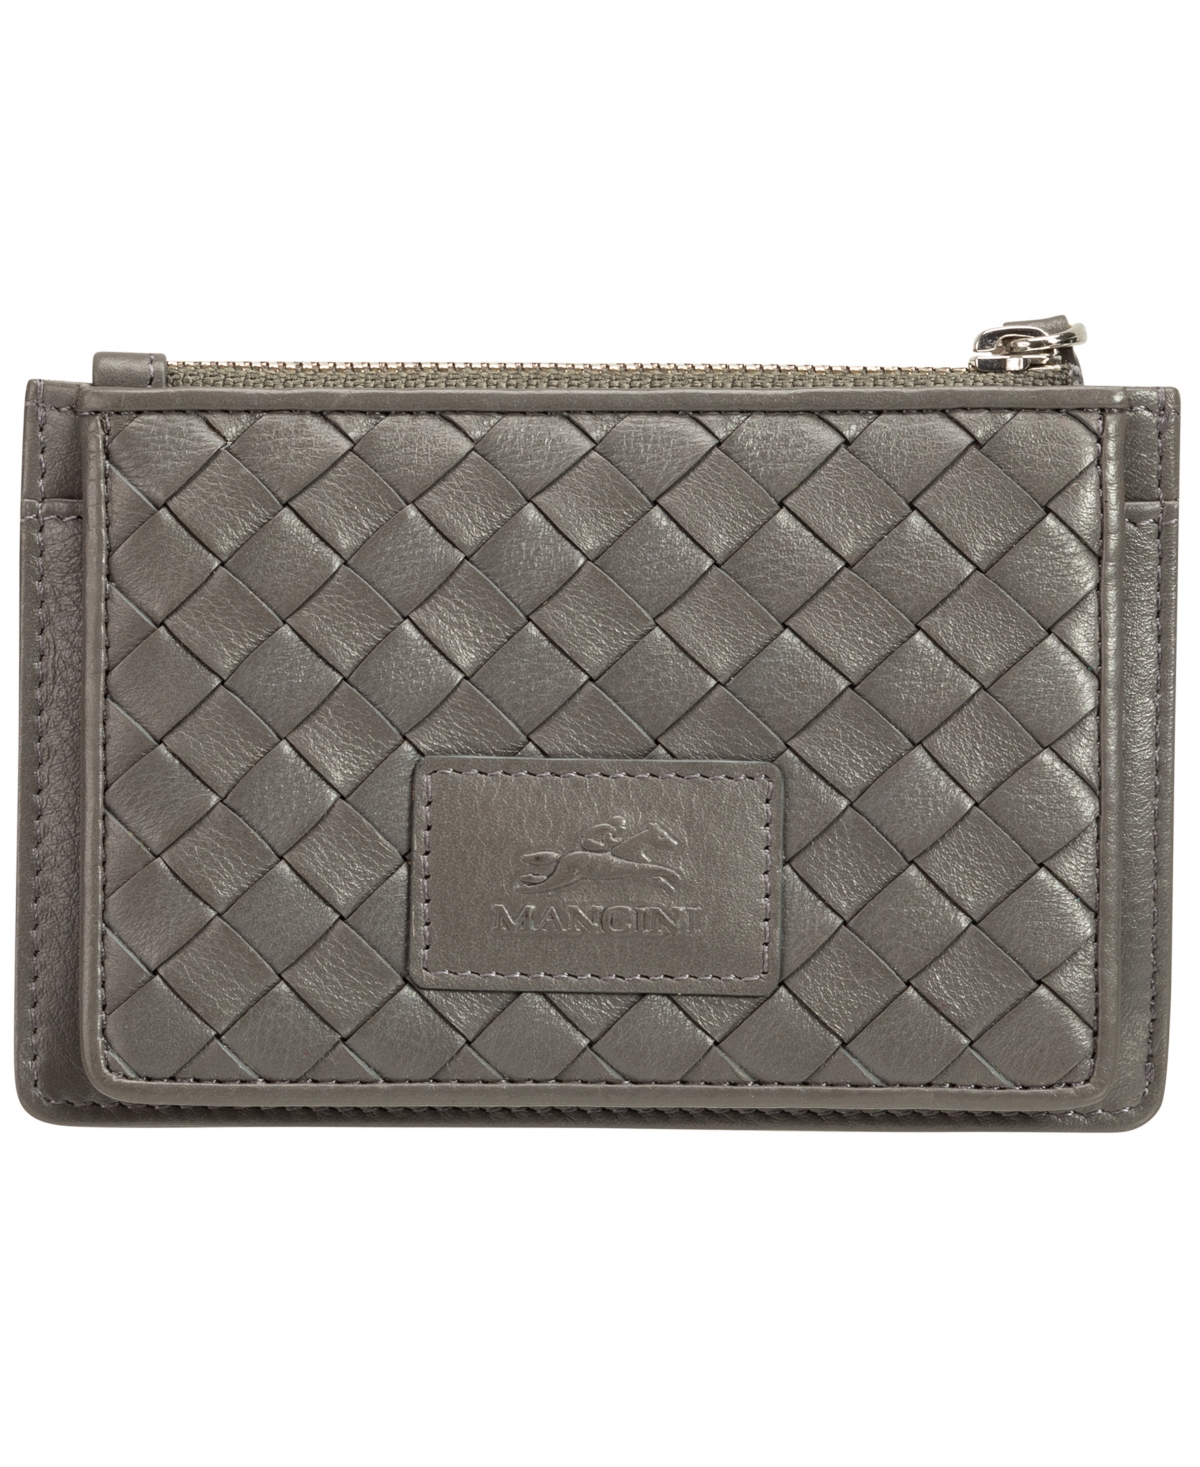 Mancini Women's Basket Weave Collection Rfid Secure Card Case and Coin Pocket